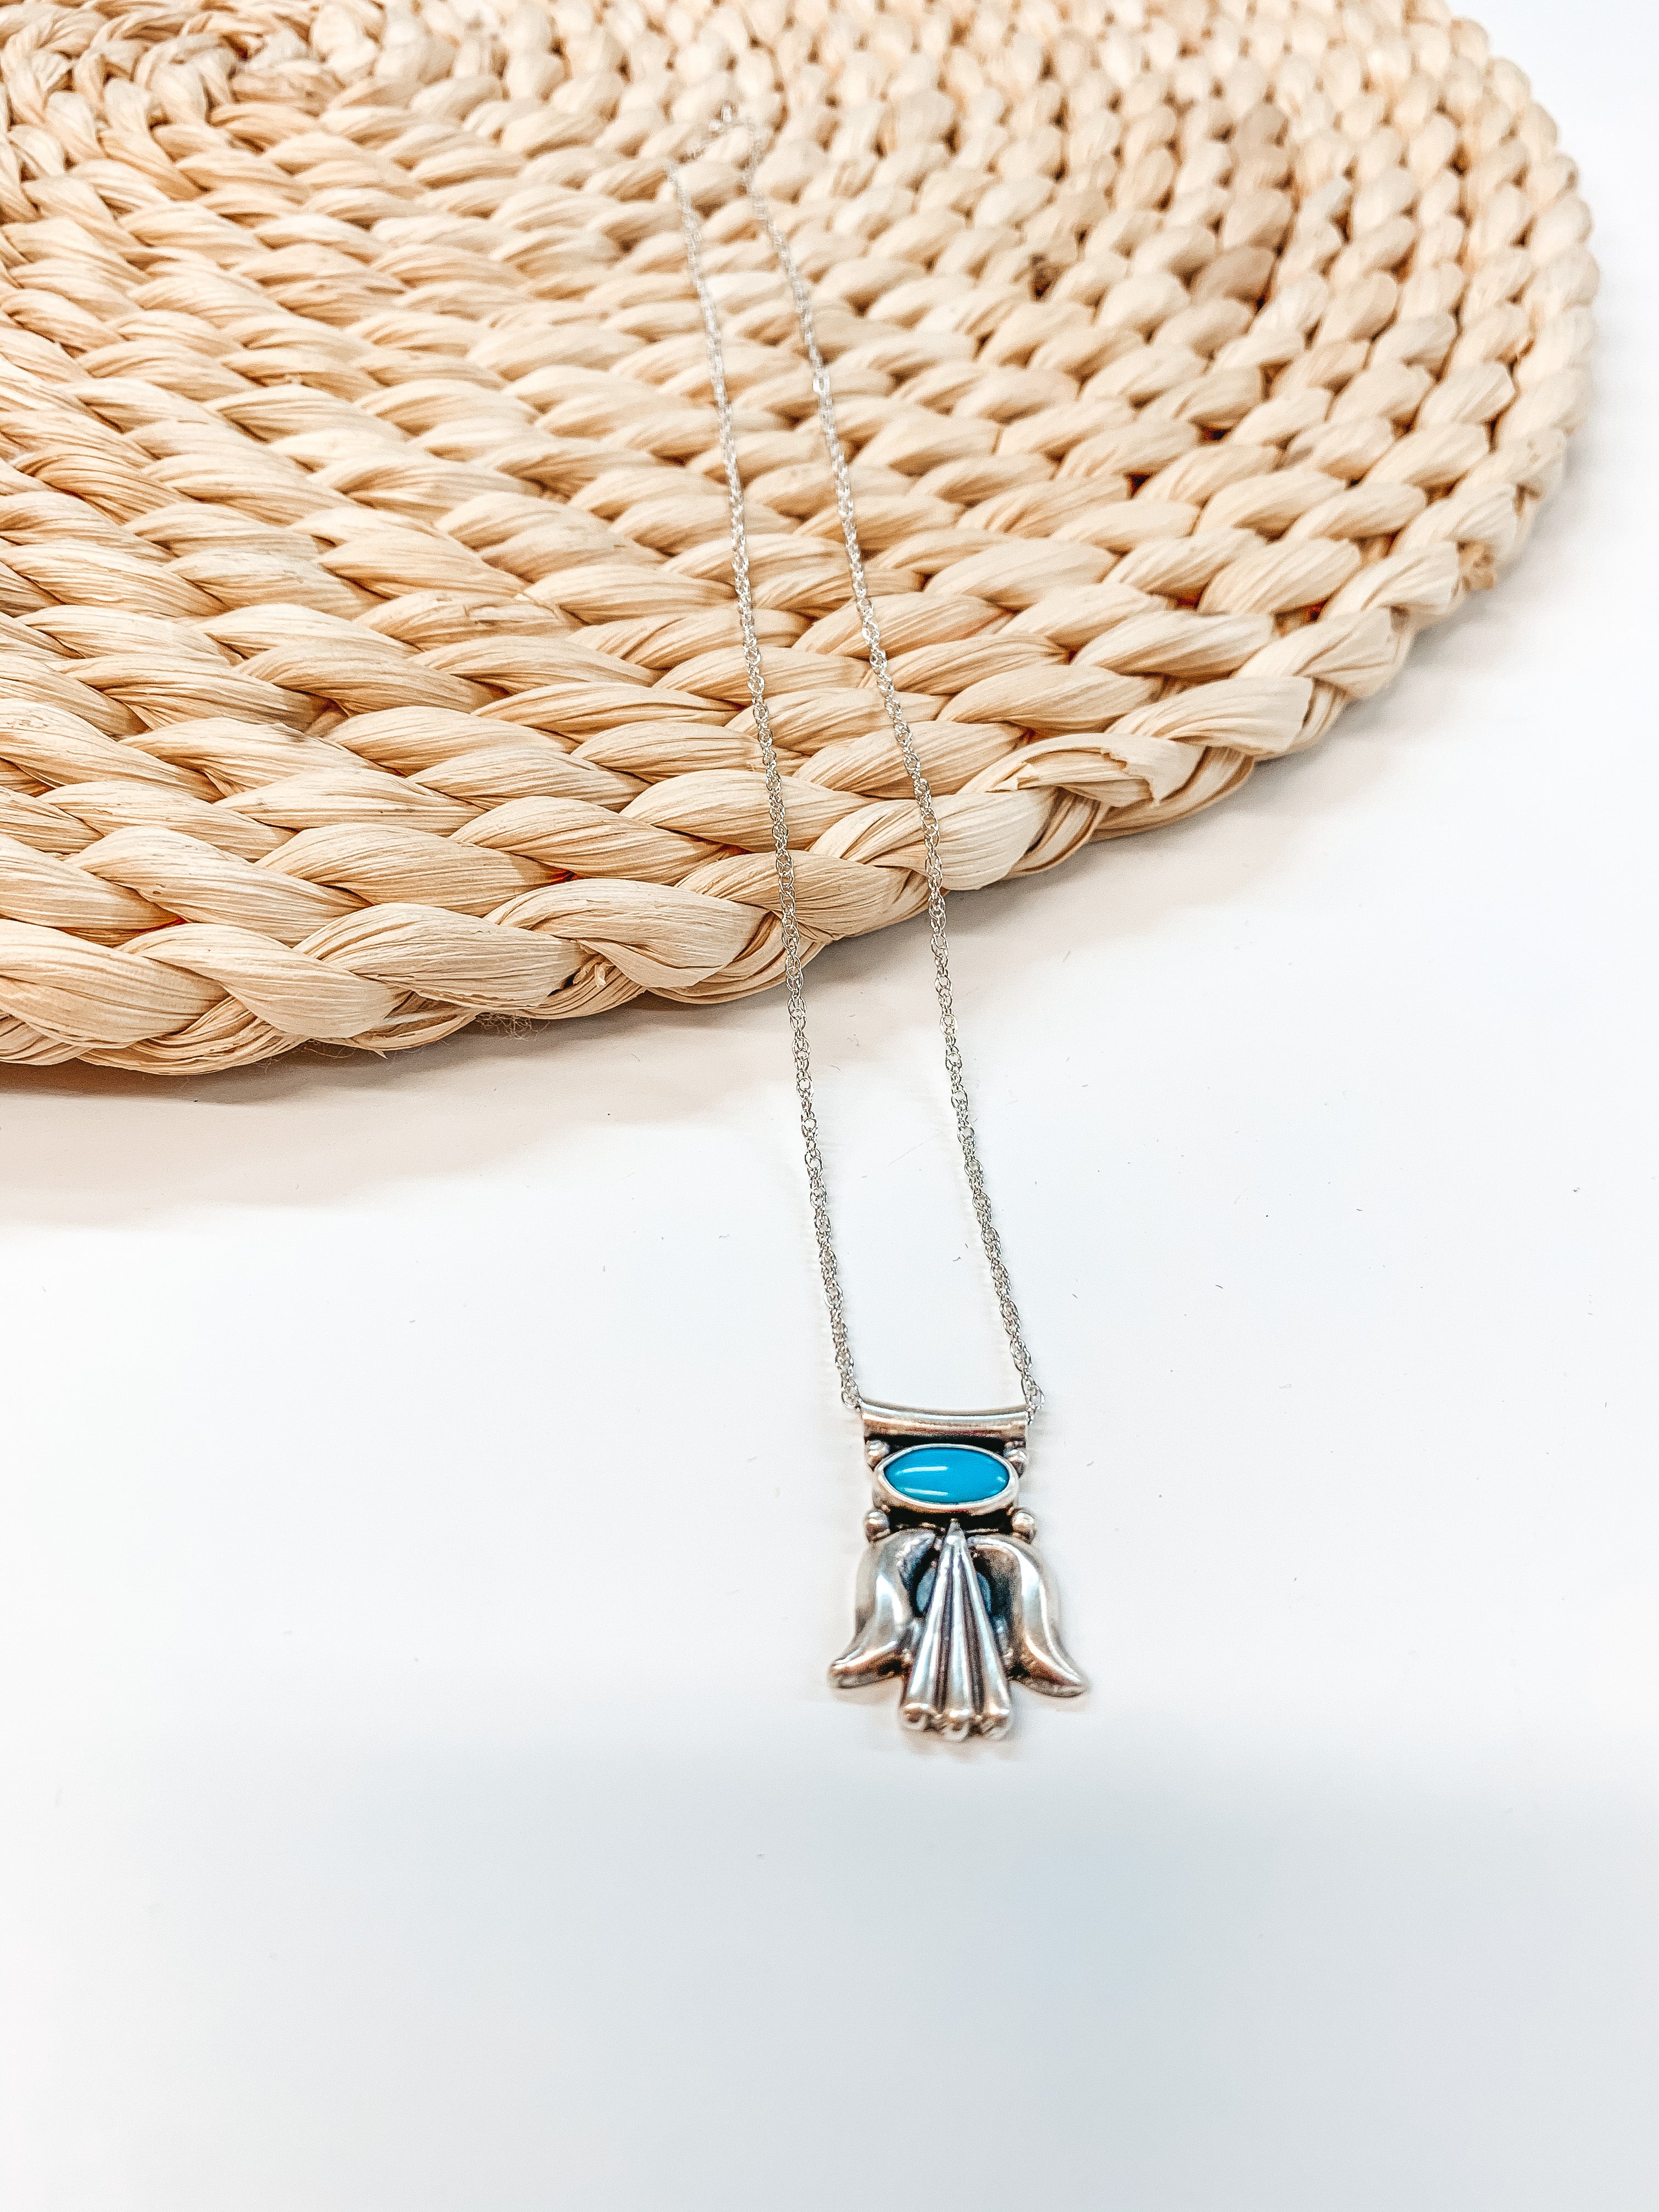 Lee Shorty | Navajo Handmade Genuine Sterling Silver and Kingman Turquoise Pendant Chain Necklace - Giddy Up Glamour Boutique